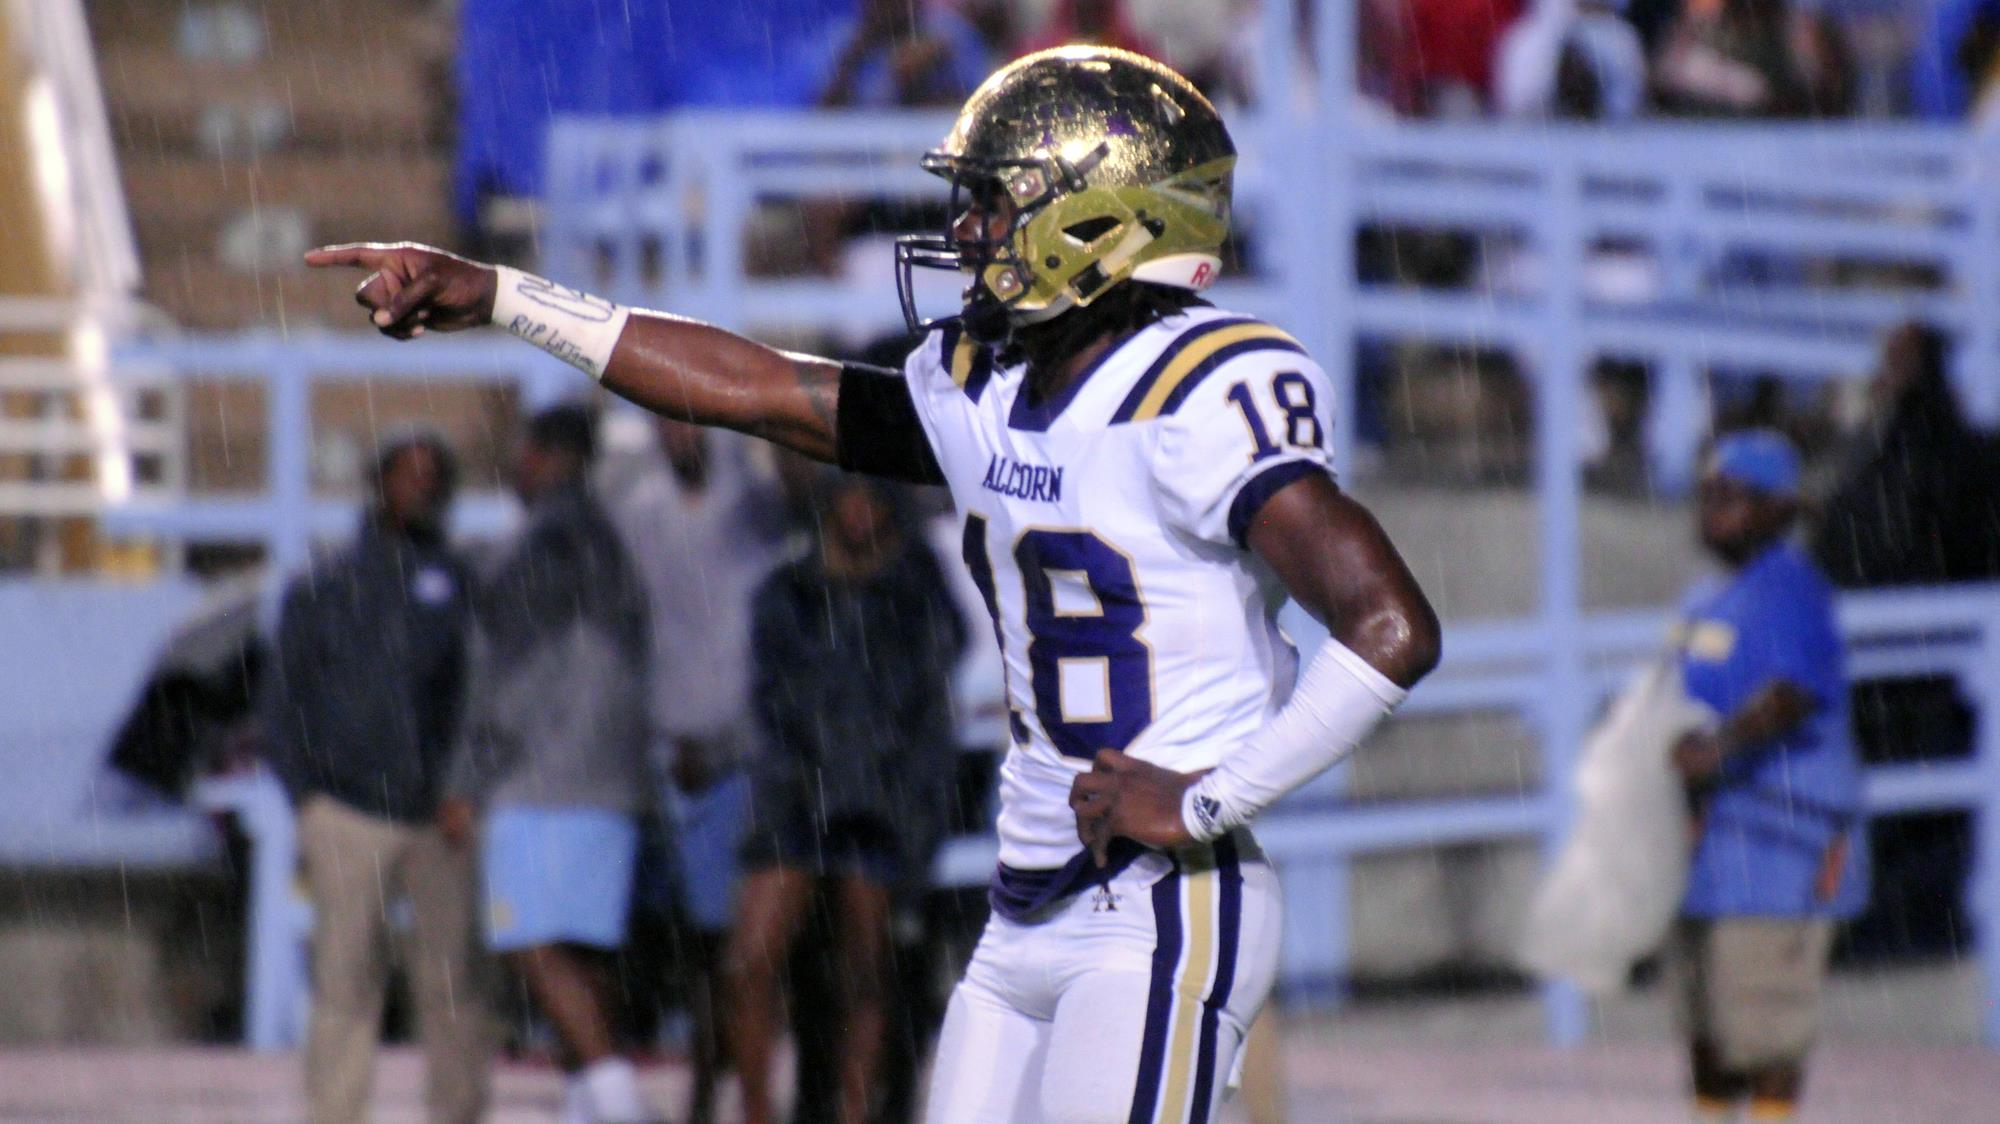 Defense was key in Alcorn State's 203 win over Southern